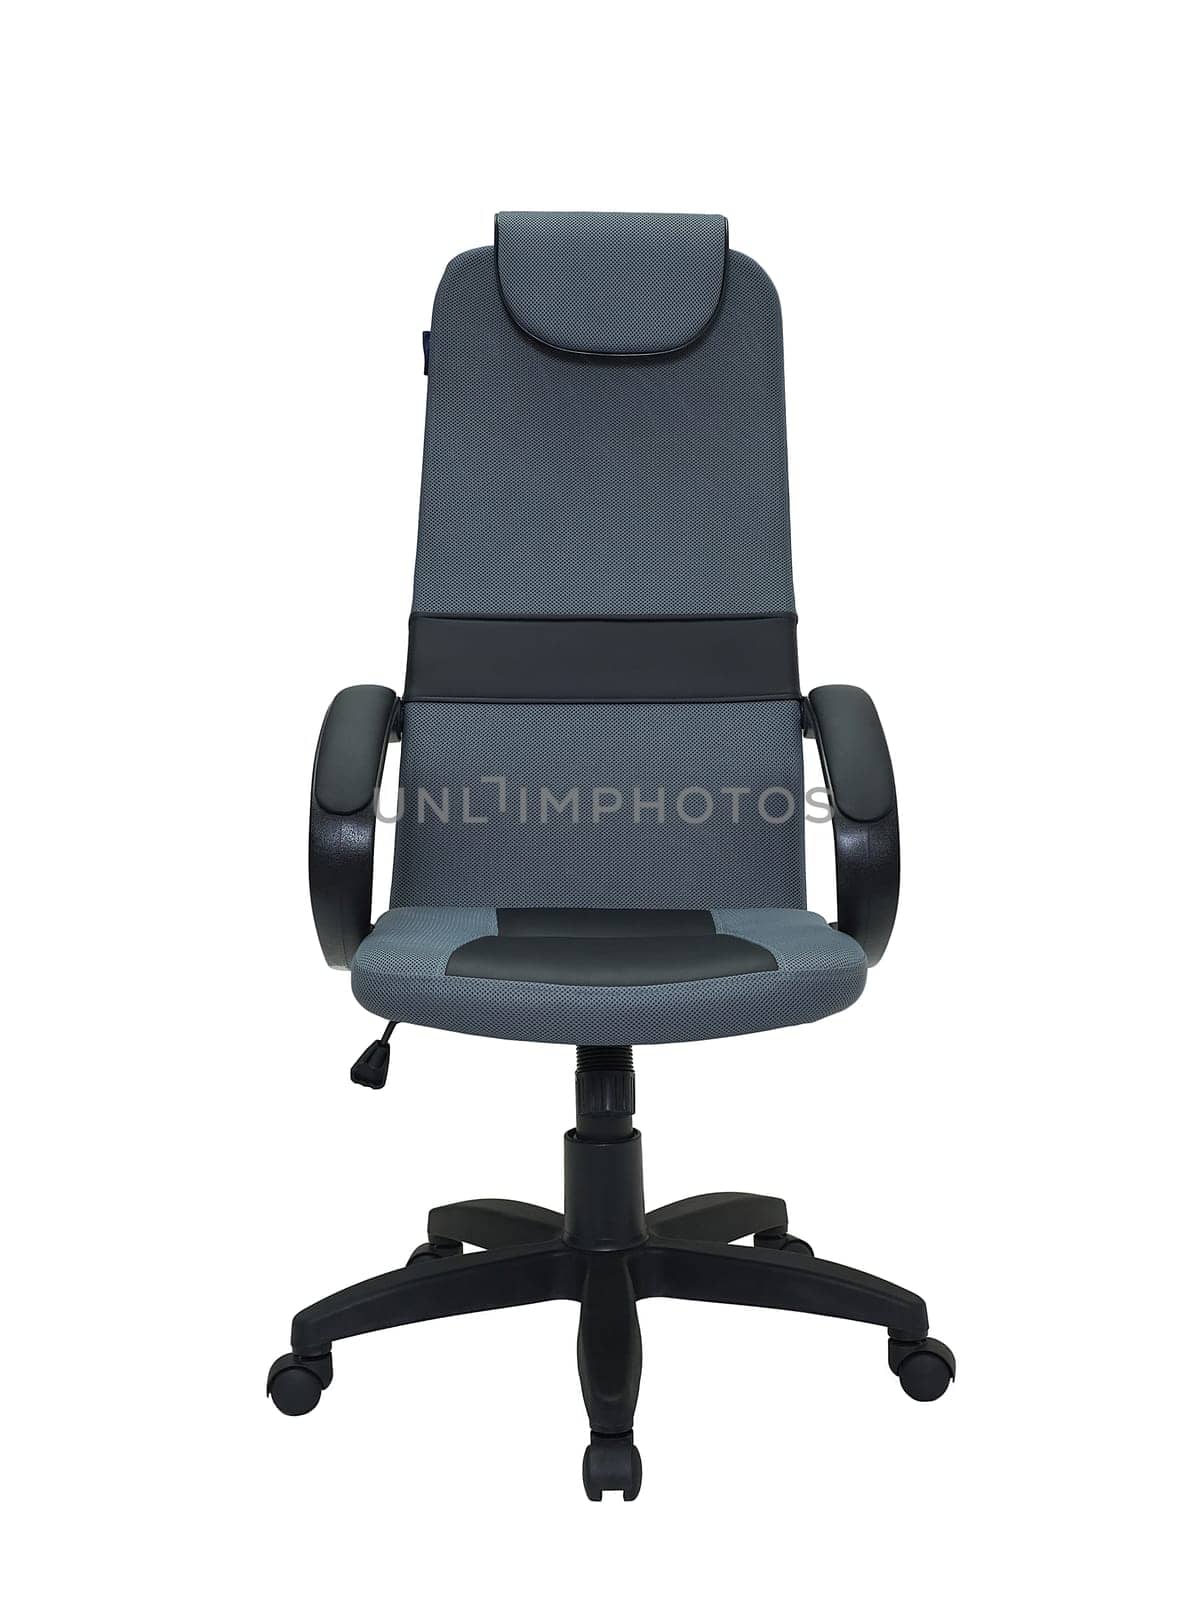 grey office armchair on wheels isolated on white background, front view. furniture in minimal style